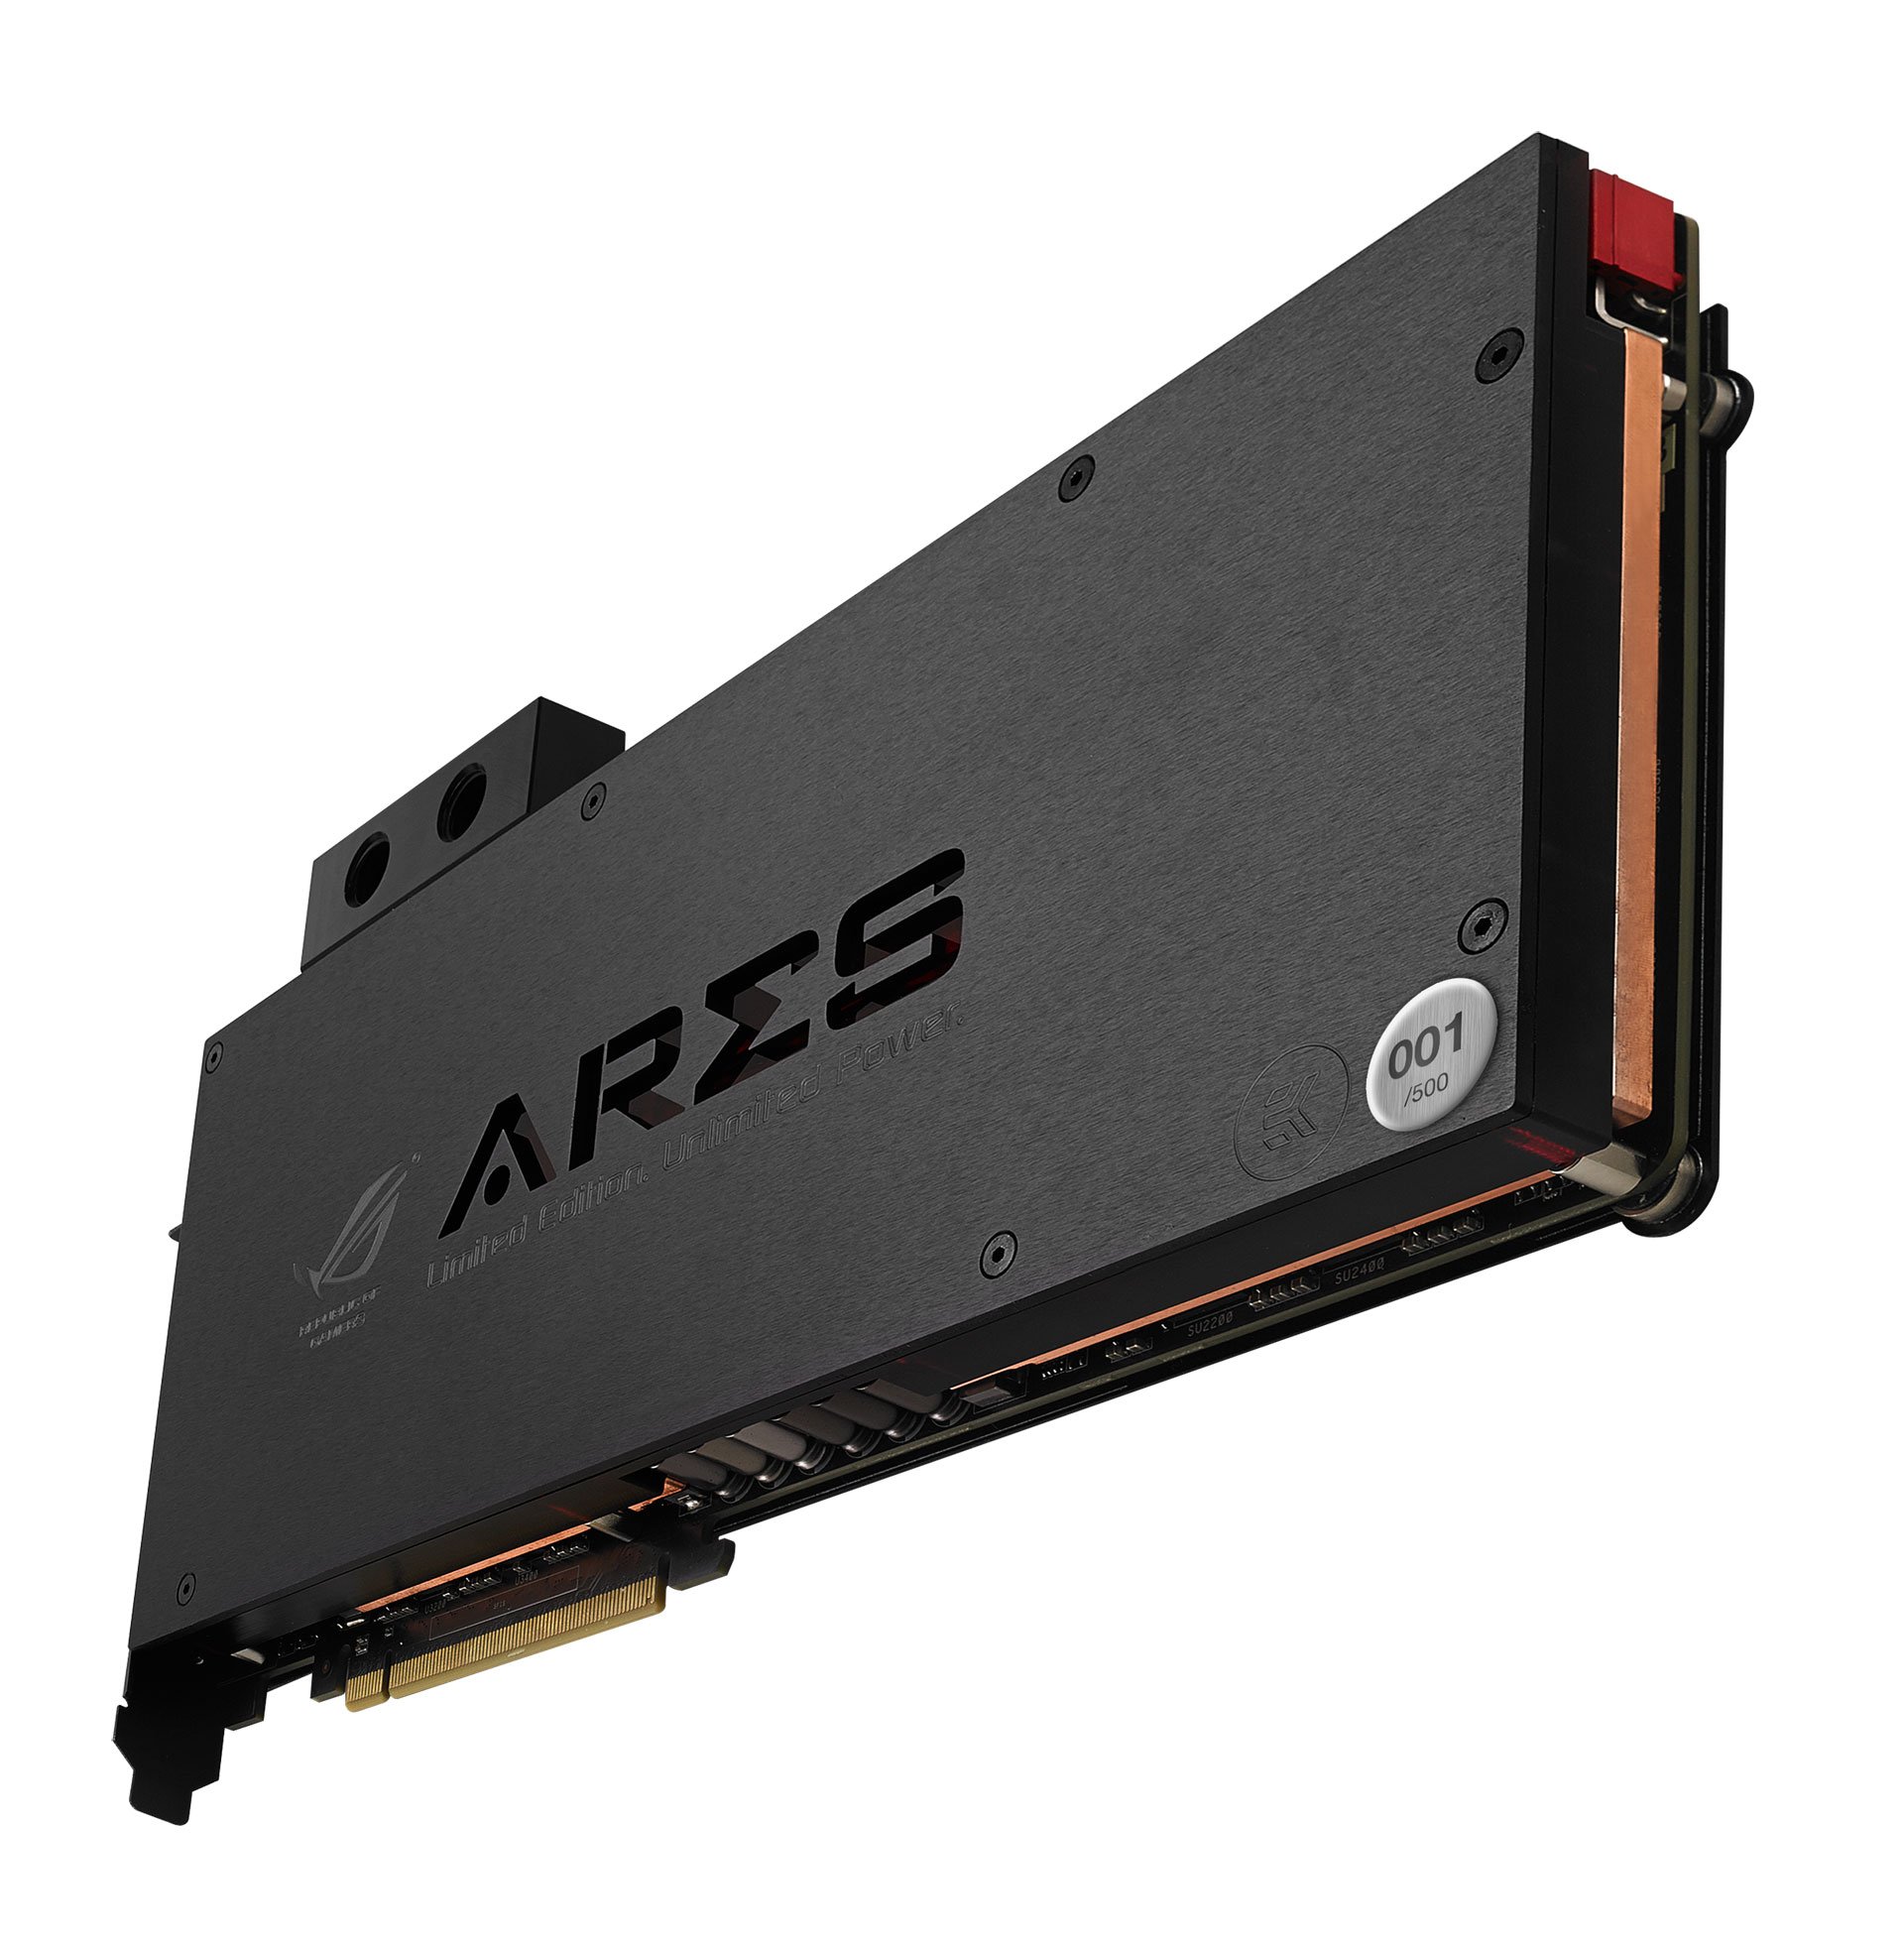 ASUS-ROG-ARES-III-Graphics-Card